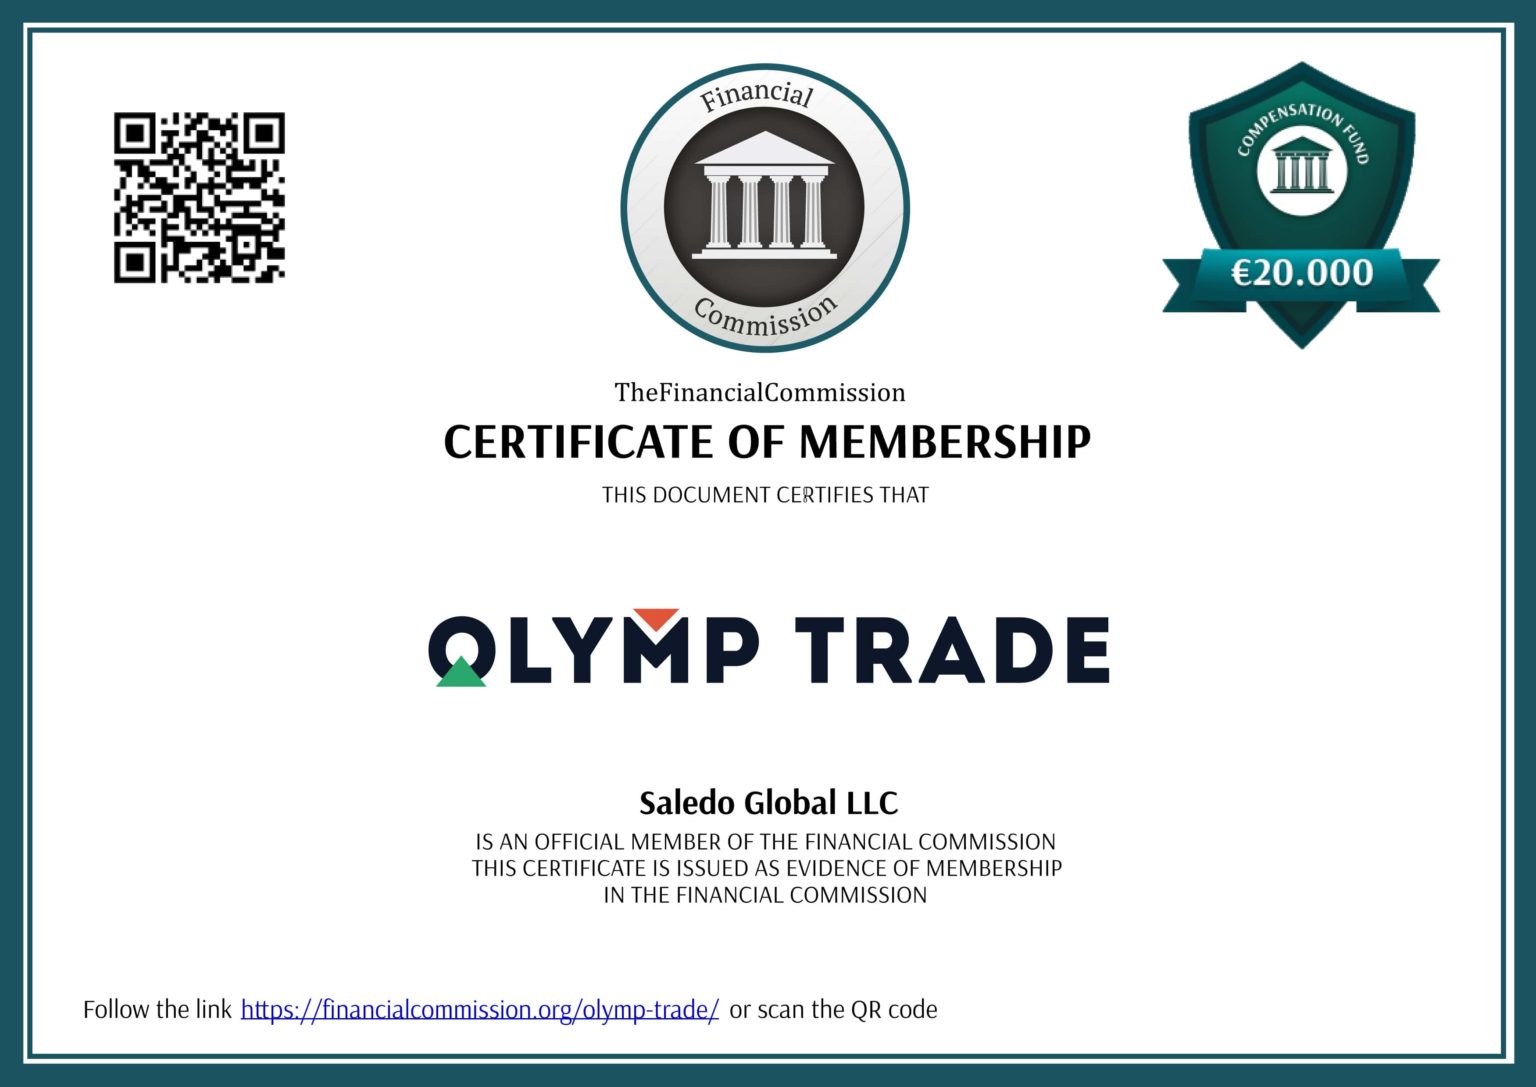 Why has My Account been Blocked on Olymp Trade? How to avoid It